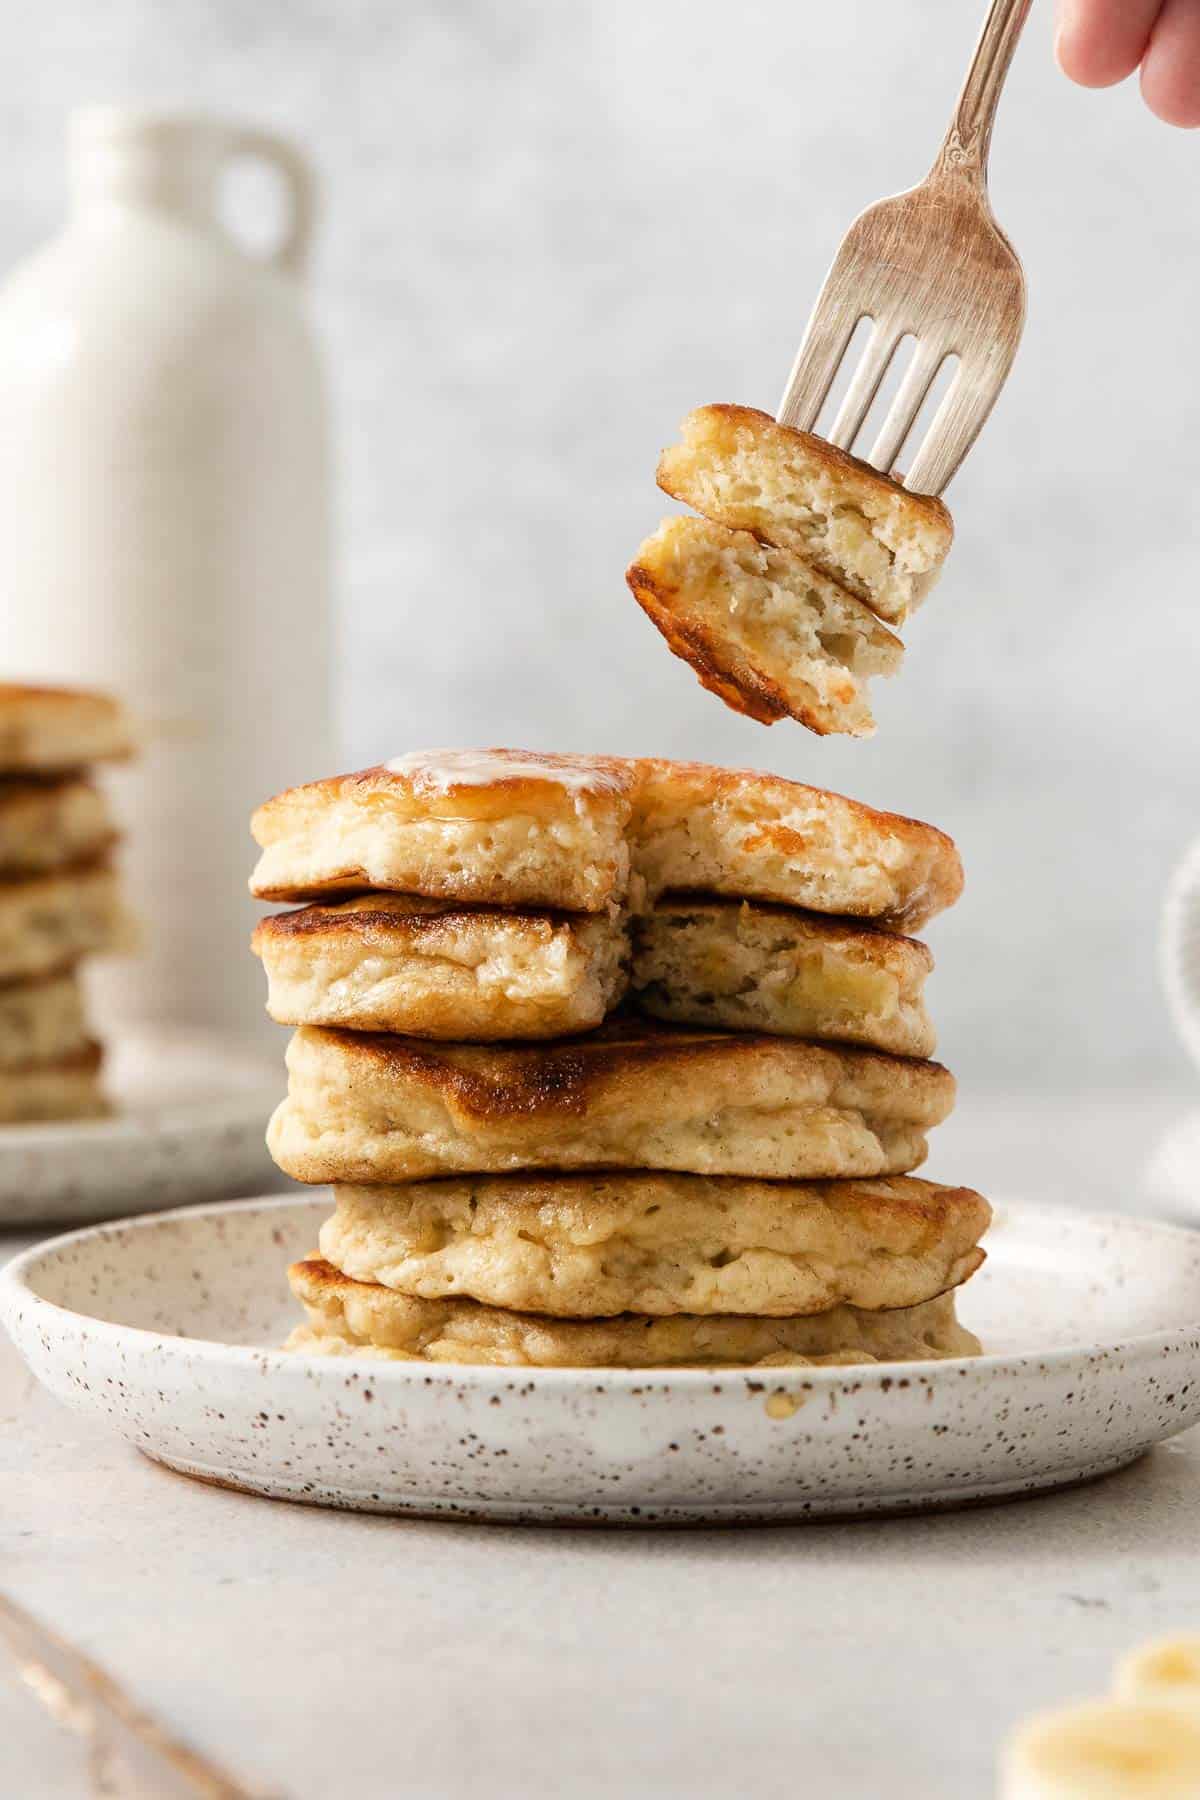 Gluten-free banana pancakes stacked on a plate with a fork taking a bite out of them